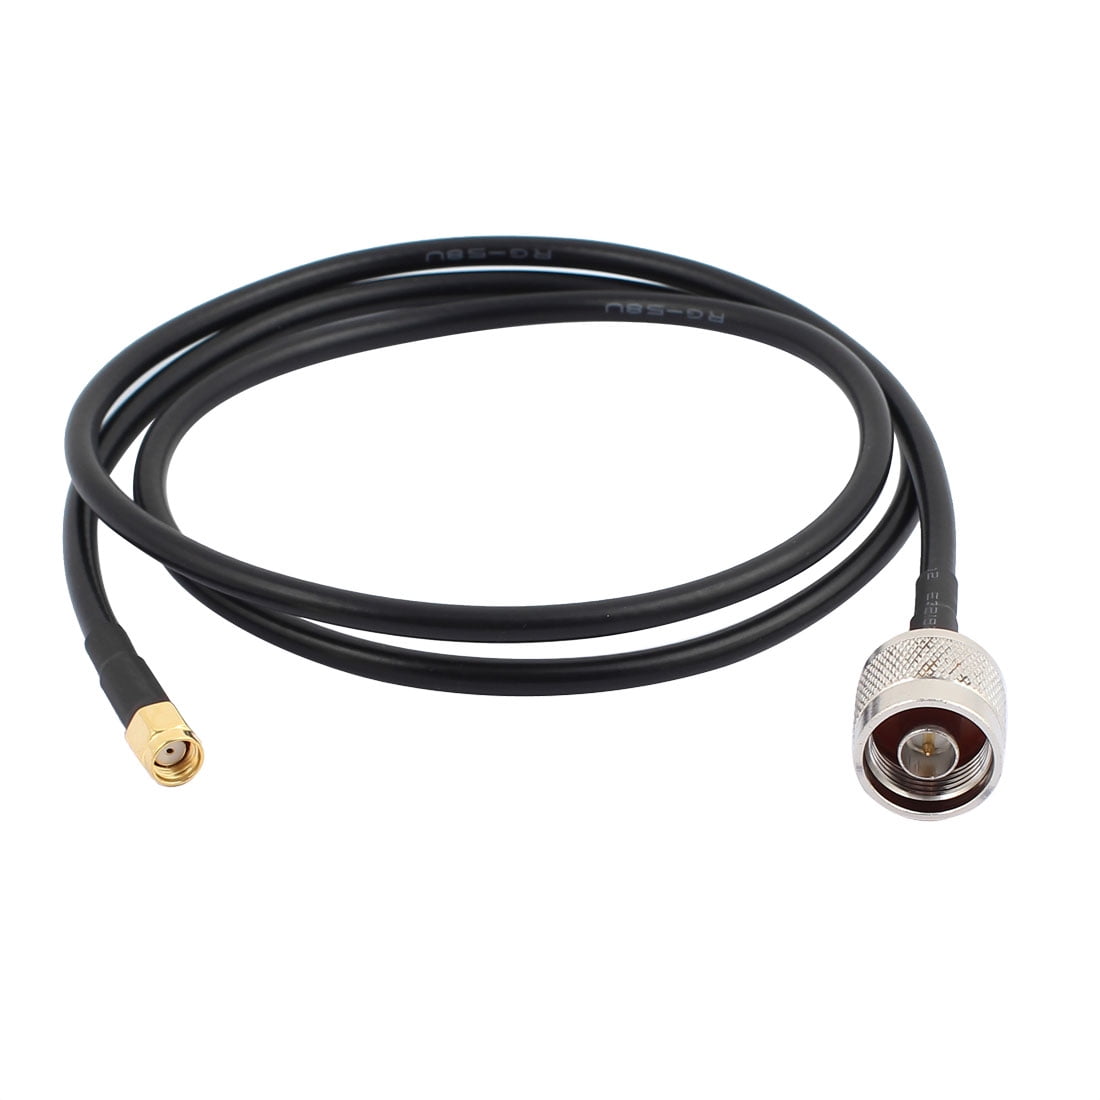 USA-CA RG58 FME FEMALE to SMA MALE ANGLE Coaxial RF Pigtail Cable 